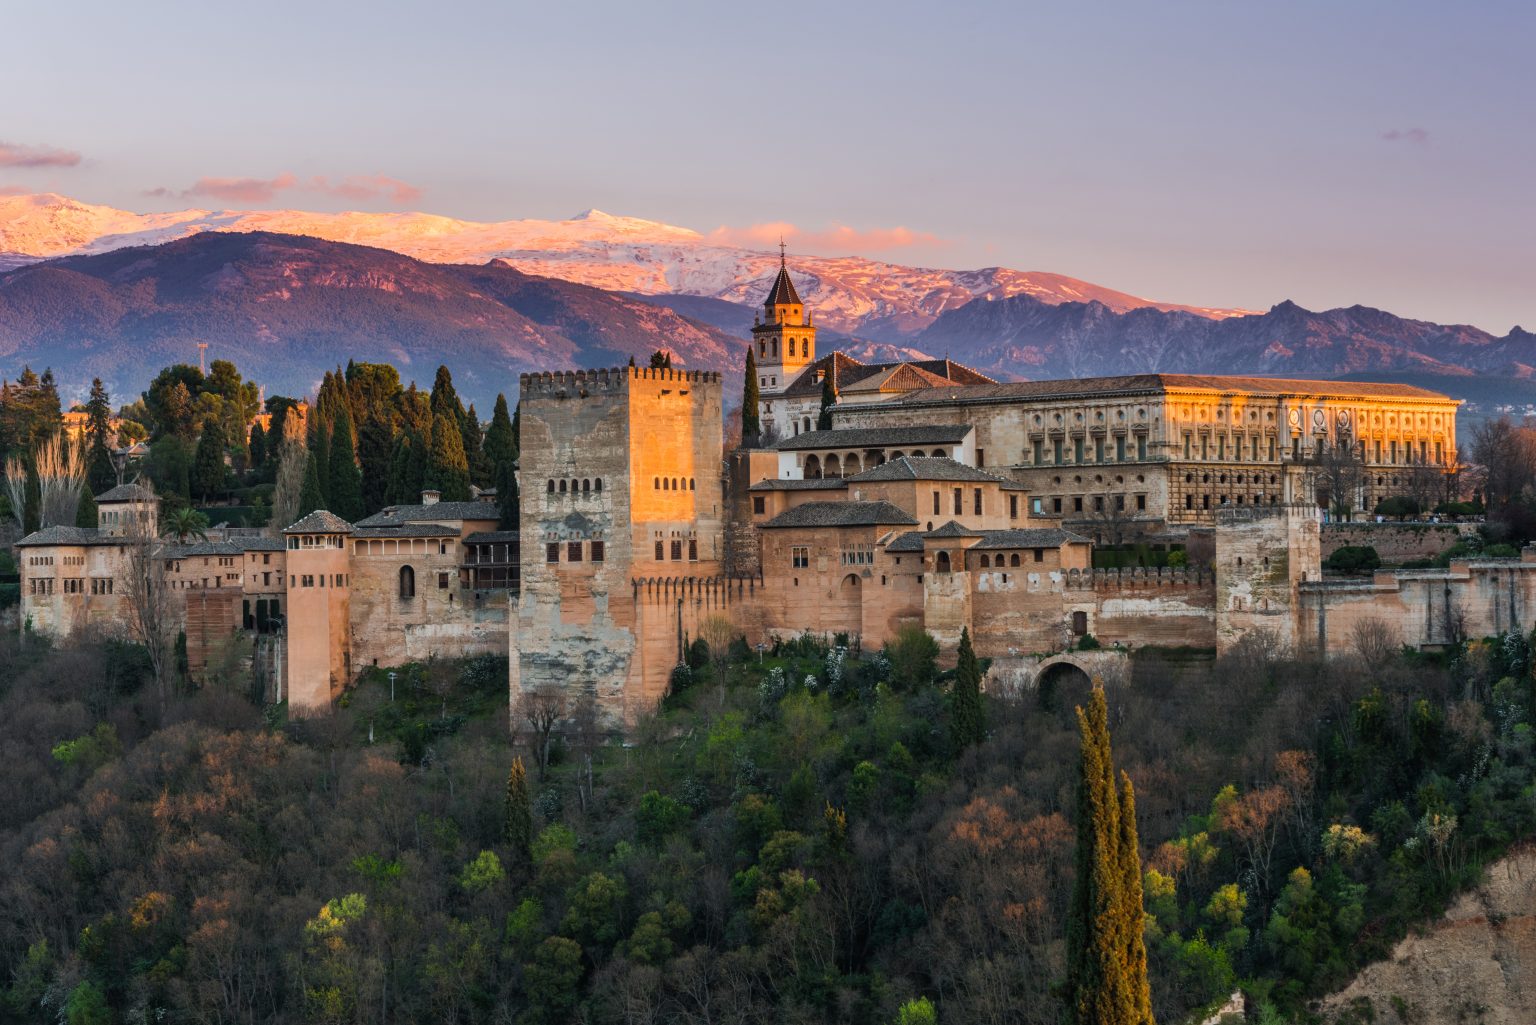 Steven Spielberg was 'very sorry' to give up Granada's Alhambra Palace ...